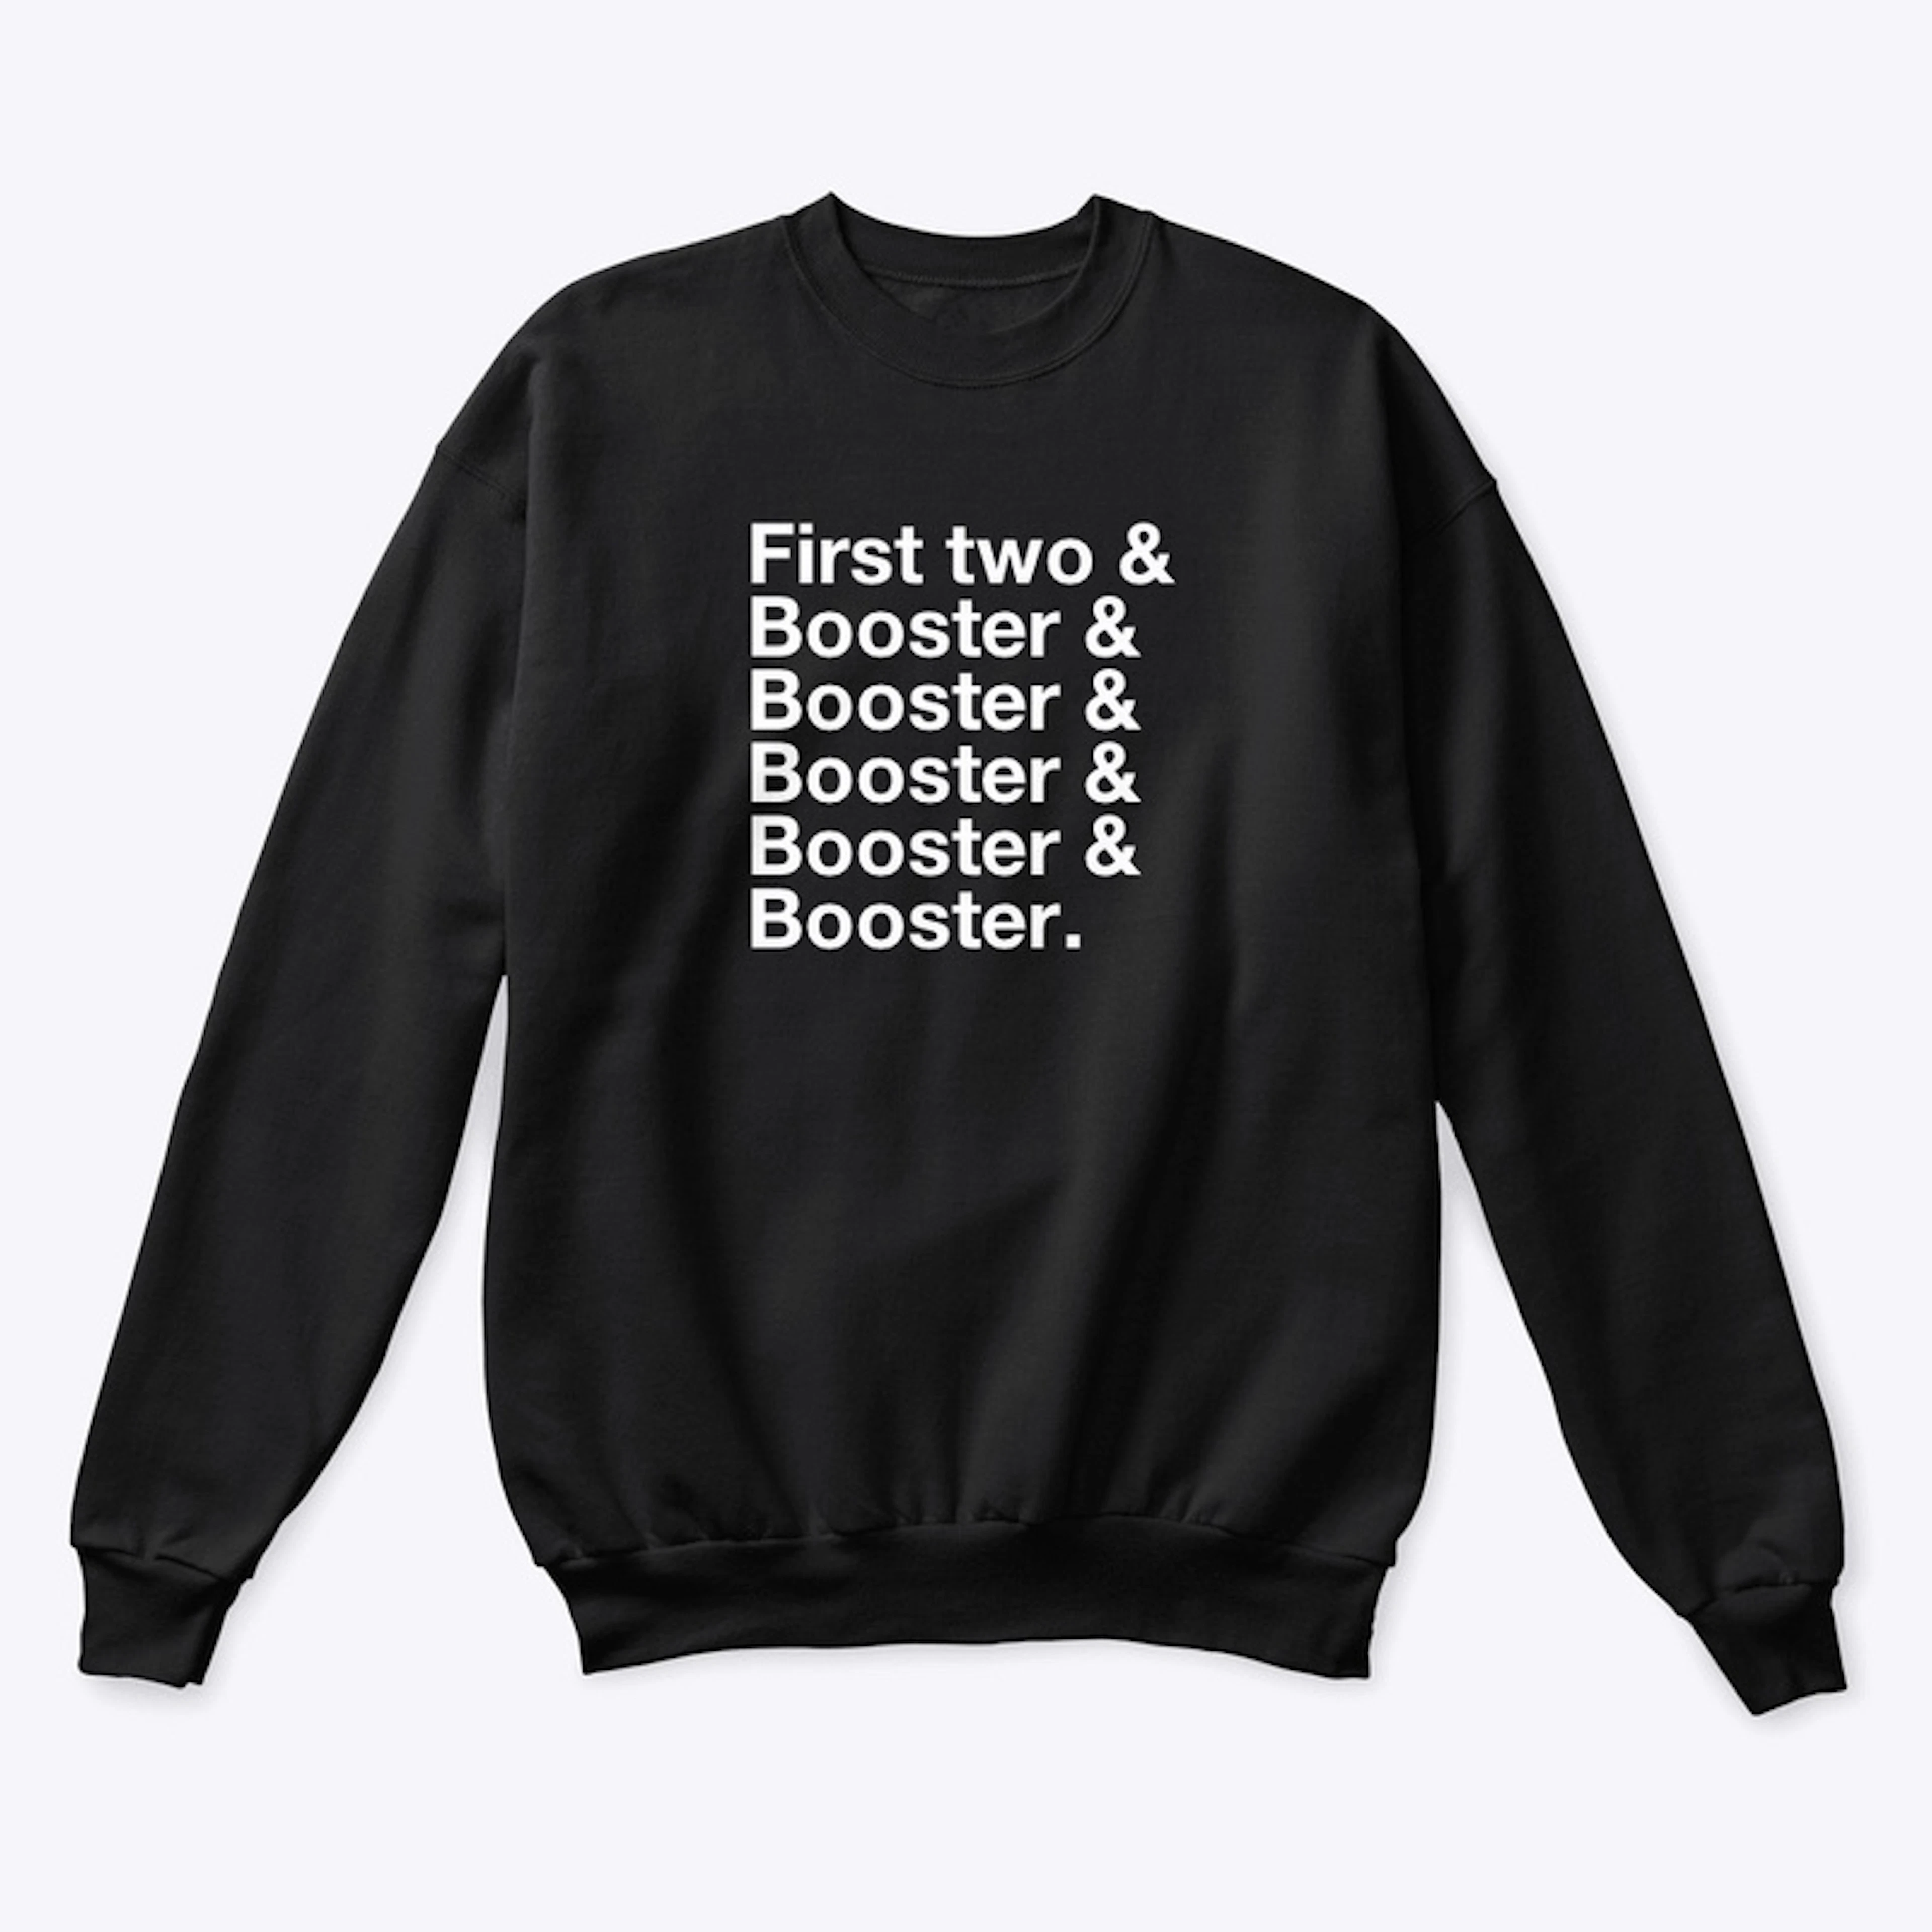 My Fifth Booster Shirt